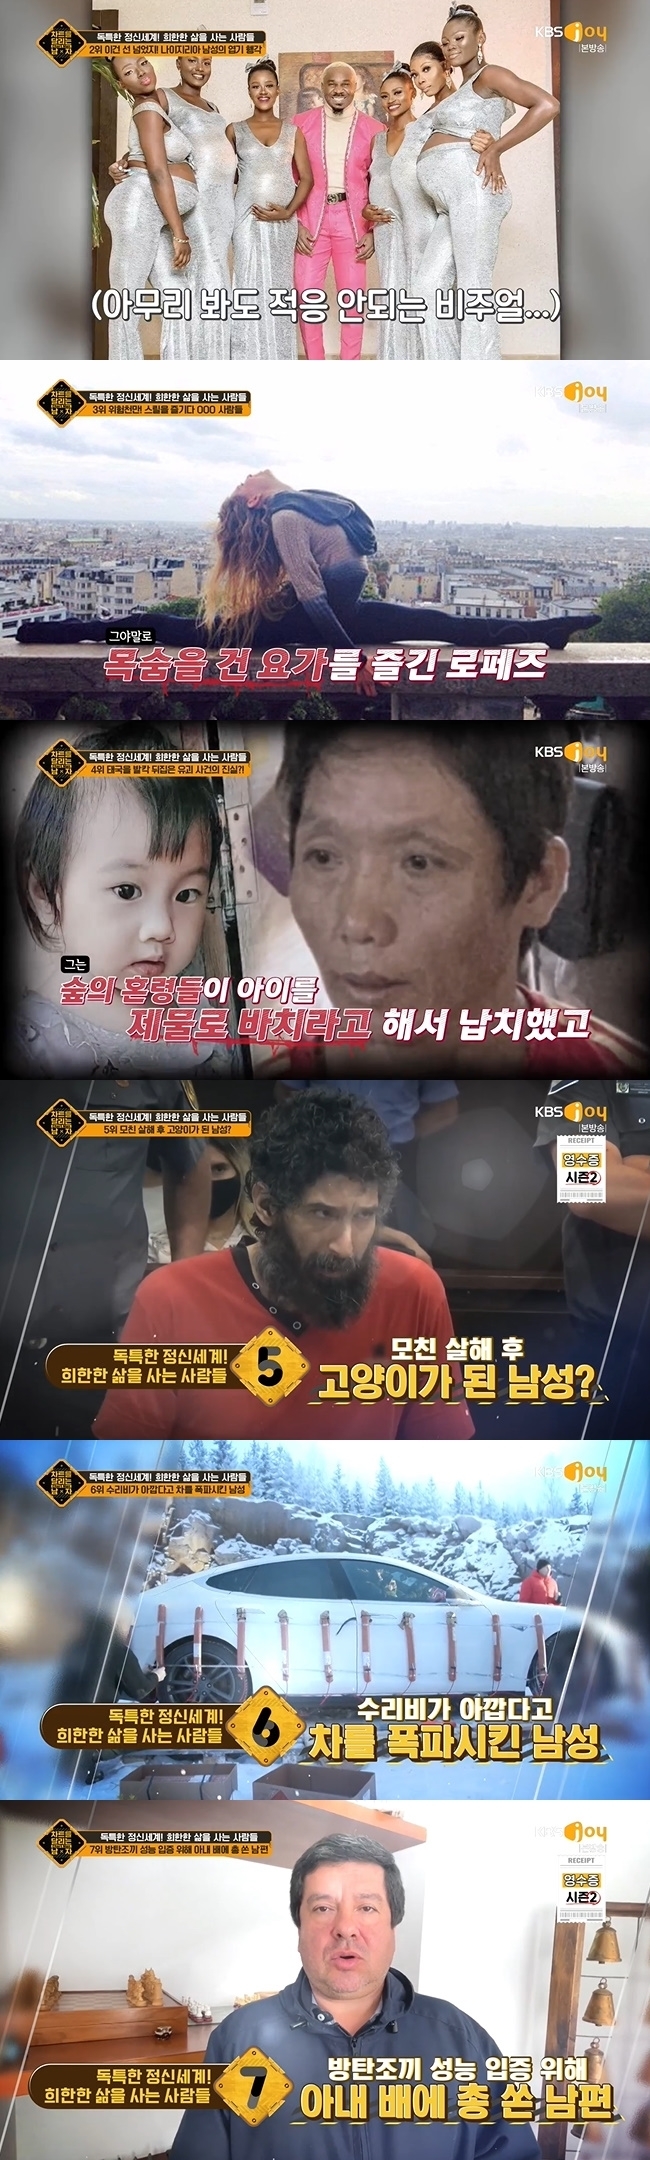 The story of people with unique minds, from men who killed their sisters because of the lottery to women who sold their farts, was revealed.On February 19, KBS Joy a man running a chart was released on the ranking of Unique Mind! People living a strange life.A 19-year-old man who came first was brutally murdered by two women, his sisters, and was sentenced to life in prison by British law One in October 2021.The man said he signed a contract with the devil on condition of winning the lottery and killed his sister to sacrifice the demon.A man who responded to a nightclub in Lagos, Nigeria, who came in second, accumulated wealth through club operations and showed off his wealth in various ways.In 2017, she called women pets and was angry with her neckline. In 2020 Friend Wedding ceremony, she appeared with six women, all of whom were prospective mothers with their own children.Since then he has had five marriages, but both pregnant and all other people.A woman in her 20s who lived in Mexico in 2019, who came in third, usually enjoyed extreme sports.She had fallen 25 meters high while enjoying a dizzying yoga on her balcony, breaking more than half of her body bones, and was forced to enter the bottle for three years.The fourth place was the truth of the kidnapping that overturned Thailand. In 2021, a 23-month-old girl disappeared from a village in Chiang Mai.More than 200 police and rescue teams One have been searching, and shortly after, the childs fathers Friend was arrested as a kidnapper.He confessed to kidnapping the child to sacrifice to the ghost of the forest.A Finnish man, who came sixth, left his car to the garage one day after an unknown leak and code error occurred in an electric car worth 75 million One.He heard from the repair shop that there is no guarantee that the problem will be solved even if the battery is replaced with 26 million one, and he chose to blow up instead of repairing the vehicle.In the eighth place, the hidden truth of the kidnapping of workers came up.In February 2021, United States of America, Arizona Phoenix, claimed that a man with an arm tied on the road was kidnapped by the police, but it was later revealed to be a self-titled drama that the man did not want to go to the company.In October 2021, a woman in India made headlines with a video of her husband frying a favorite ornamental fish.However, the fish was controversial because it was worth about 350 million One in Asian arowana, an endangered ornamental fish.10th place was the most pierced people in World.A German man in his 60s has tattooed not only a piercing over his face, but also a full-body tattoo, even an eyeball, and two horns on both sides of his forehead.A woman from Brazil, beyond 453 piercing men, recorded a total of 6005 piercings in 2009, and is still piercing.Stephanie Mato, an influencer at United States of America, has increased her followers by releasing irritating videos on SNS and YouTube as she has gained awareness.Thanks to popularity, he put his fart in a bottle and sold it for a thousand Family Dollars (about 1.2 million One Hanhwa).It earned 70,000 Family Dollars in a week of sales, and earned more than 240 million One in Hanwha.